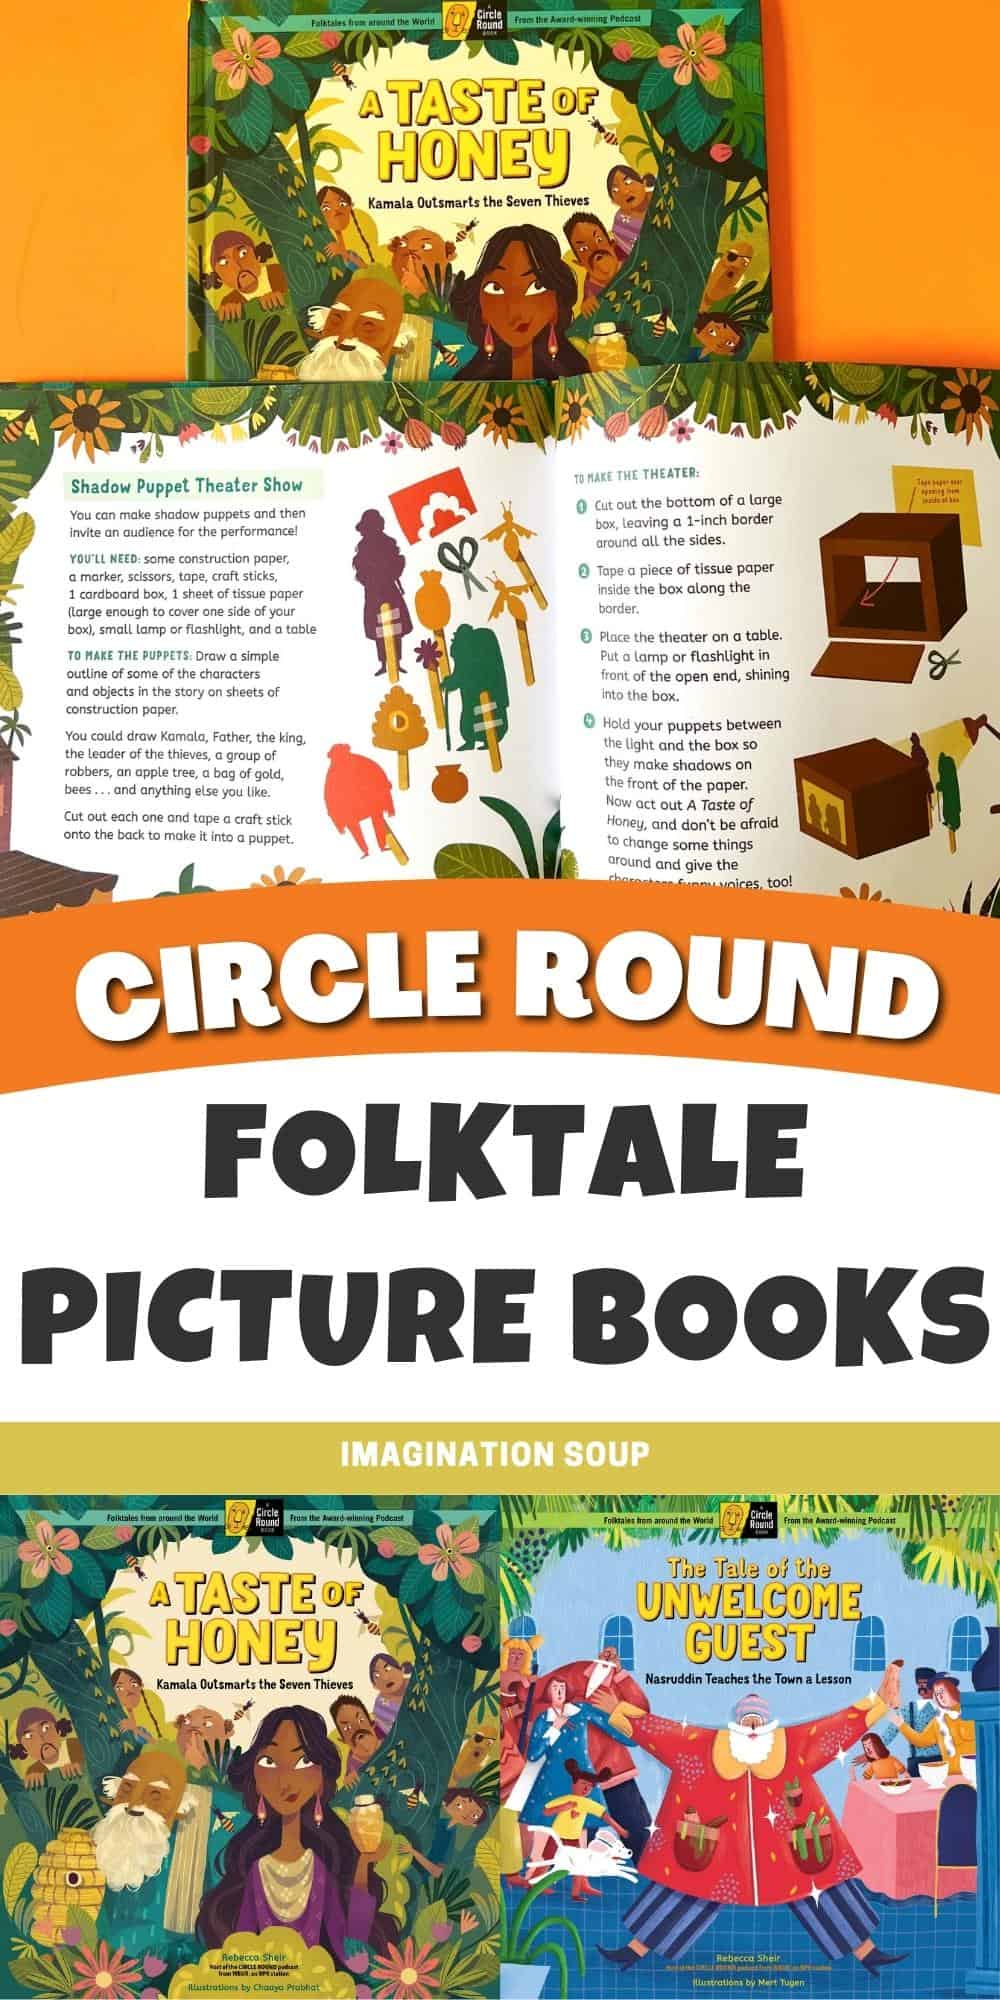 Amazing circular folktale picture books with storytelling activities